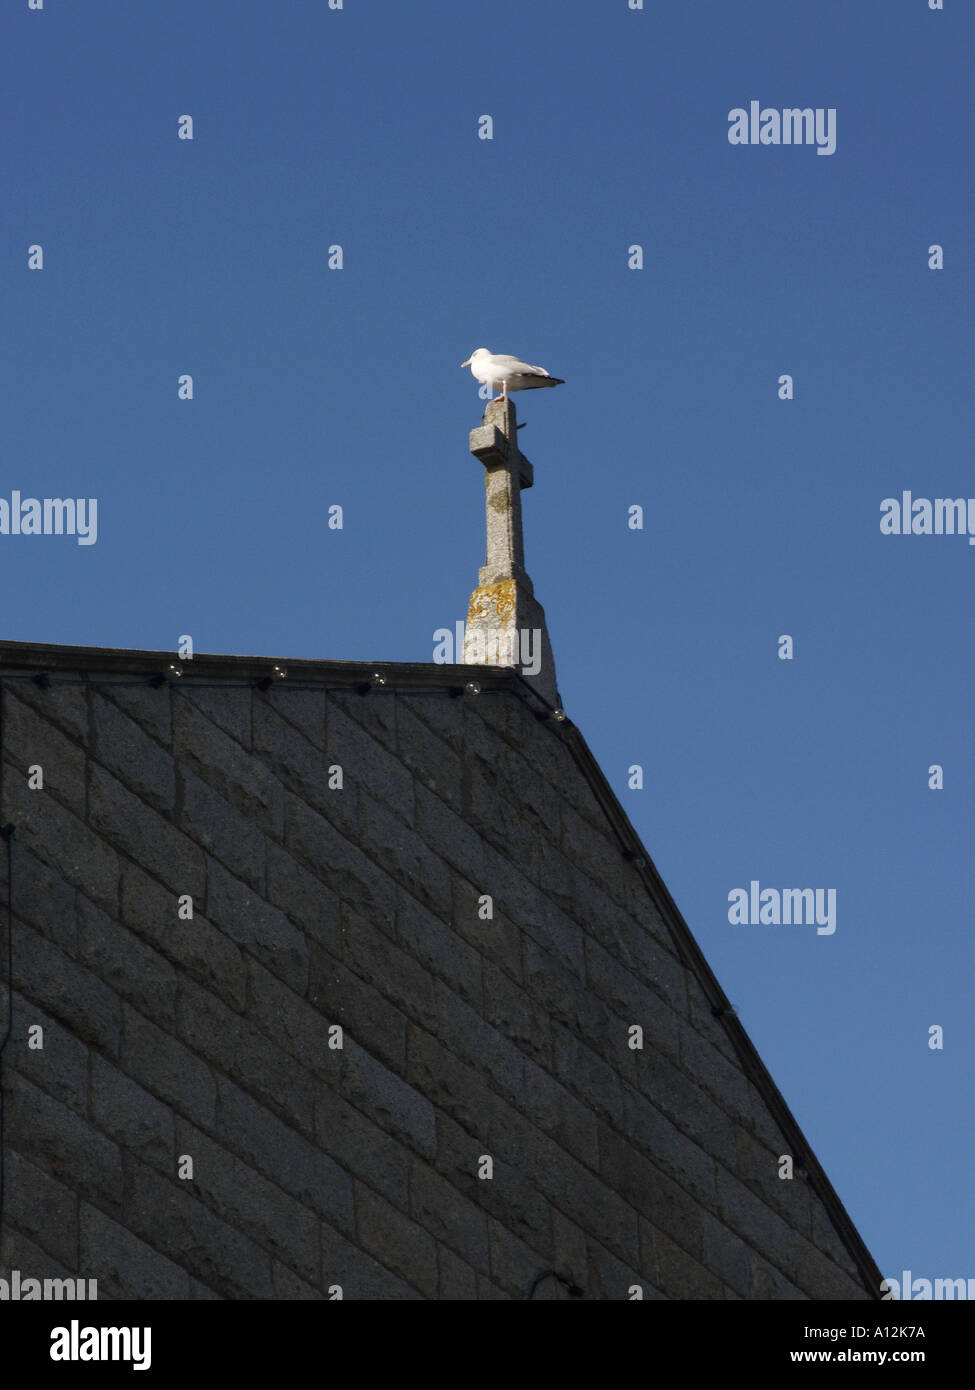 A solitary seagull sits on a finial of a church roof Stock Photo